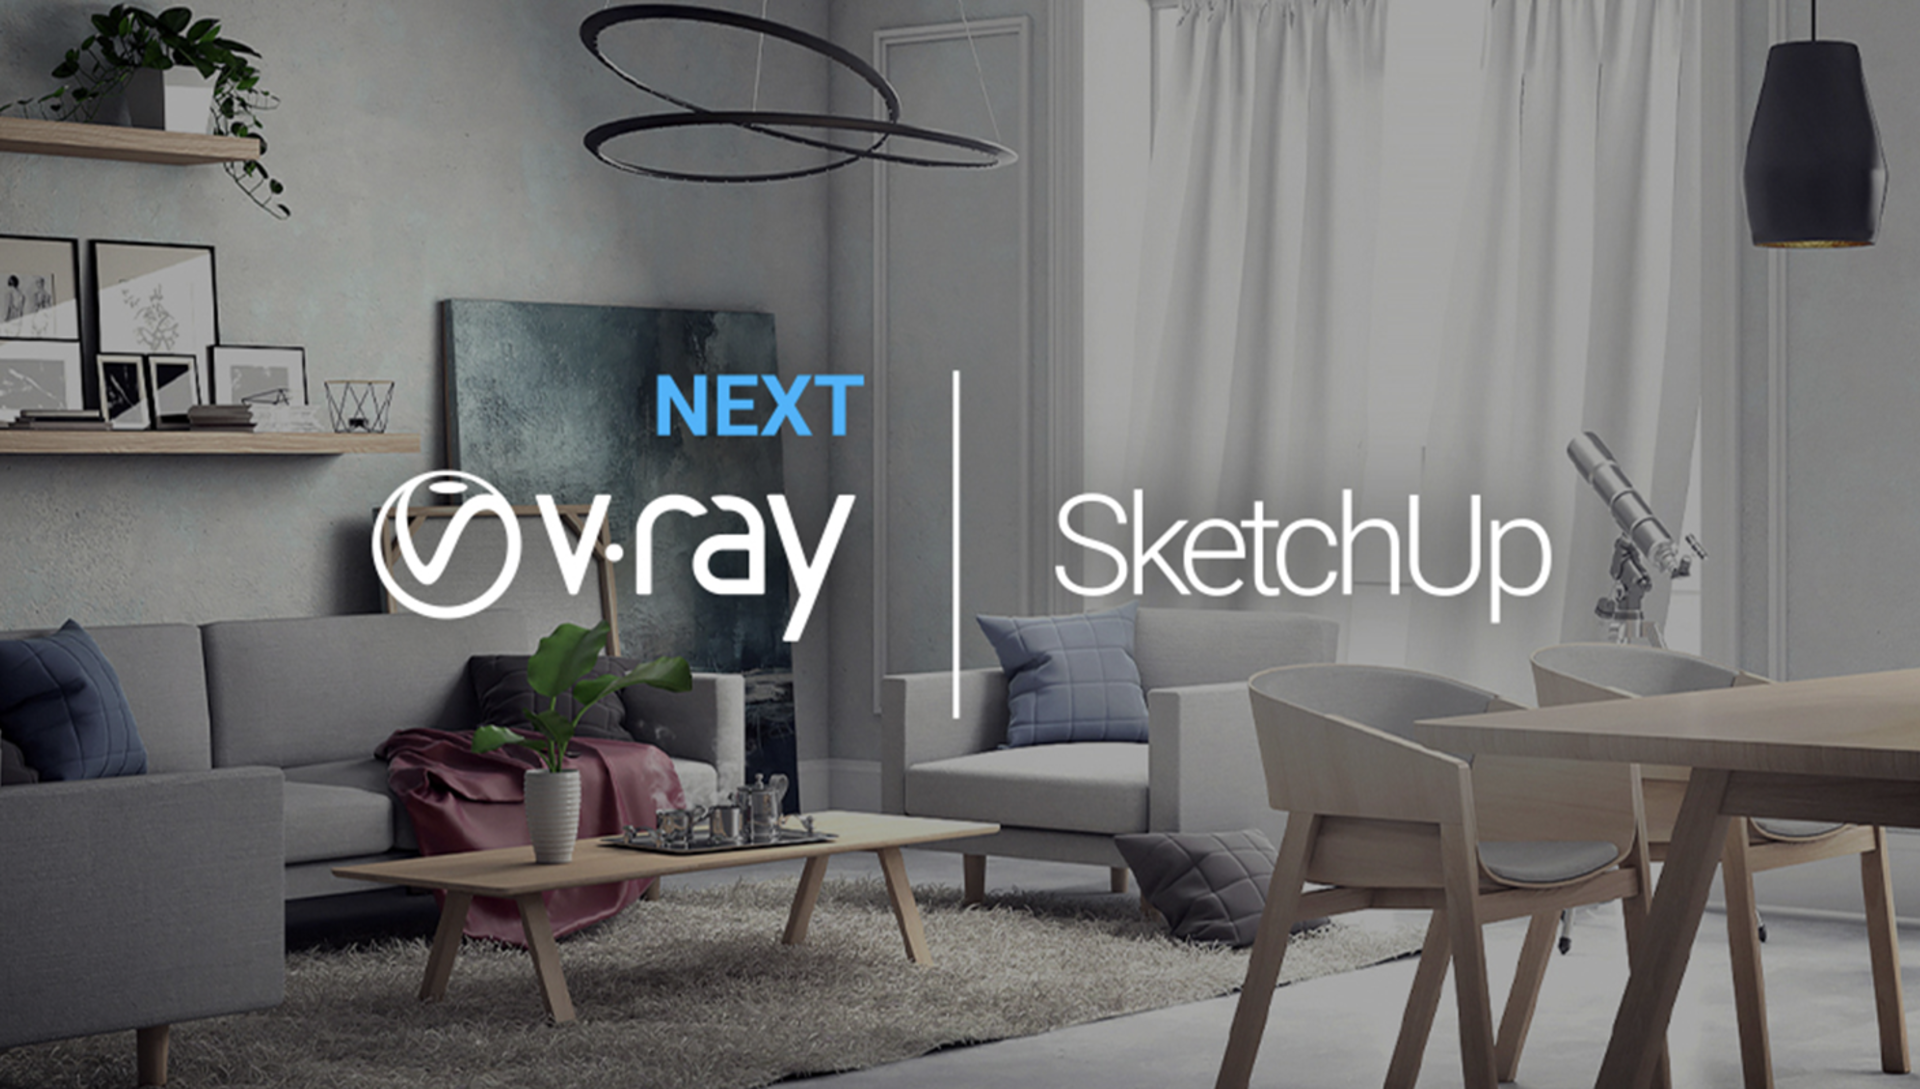 vray next 3ds max